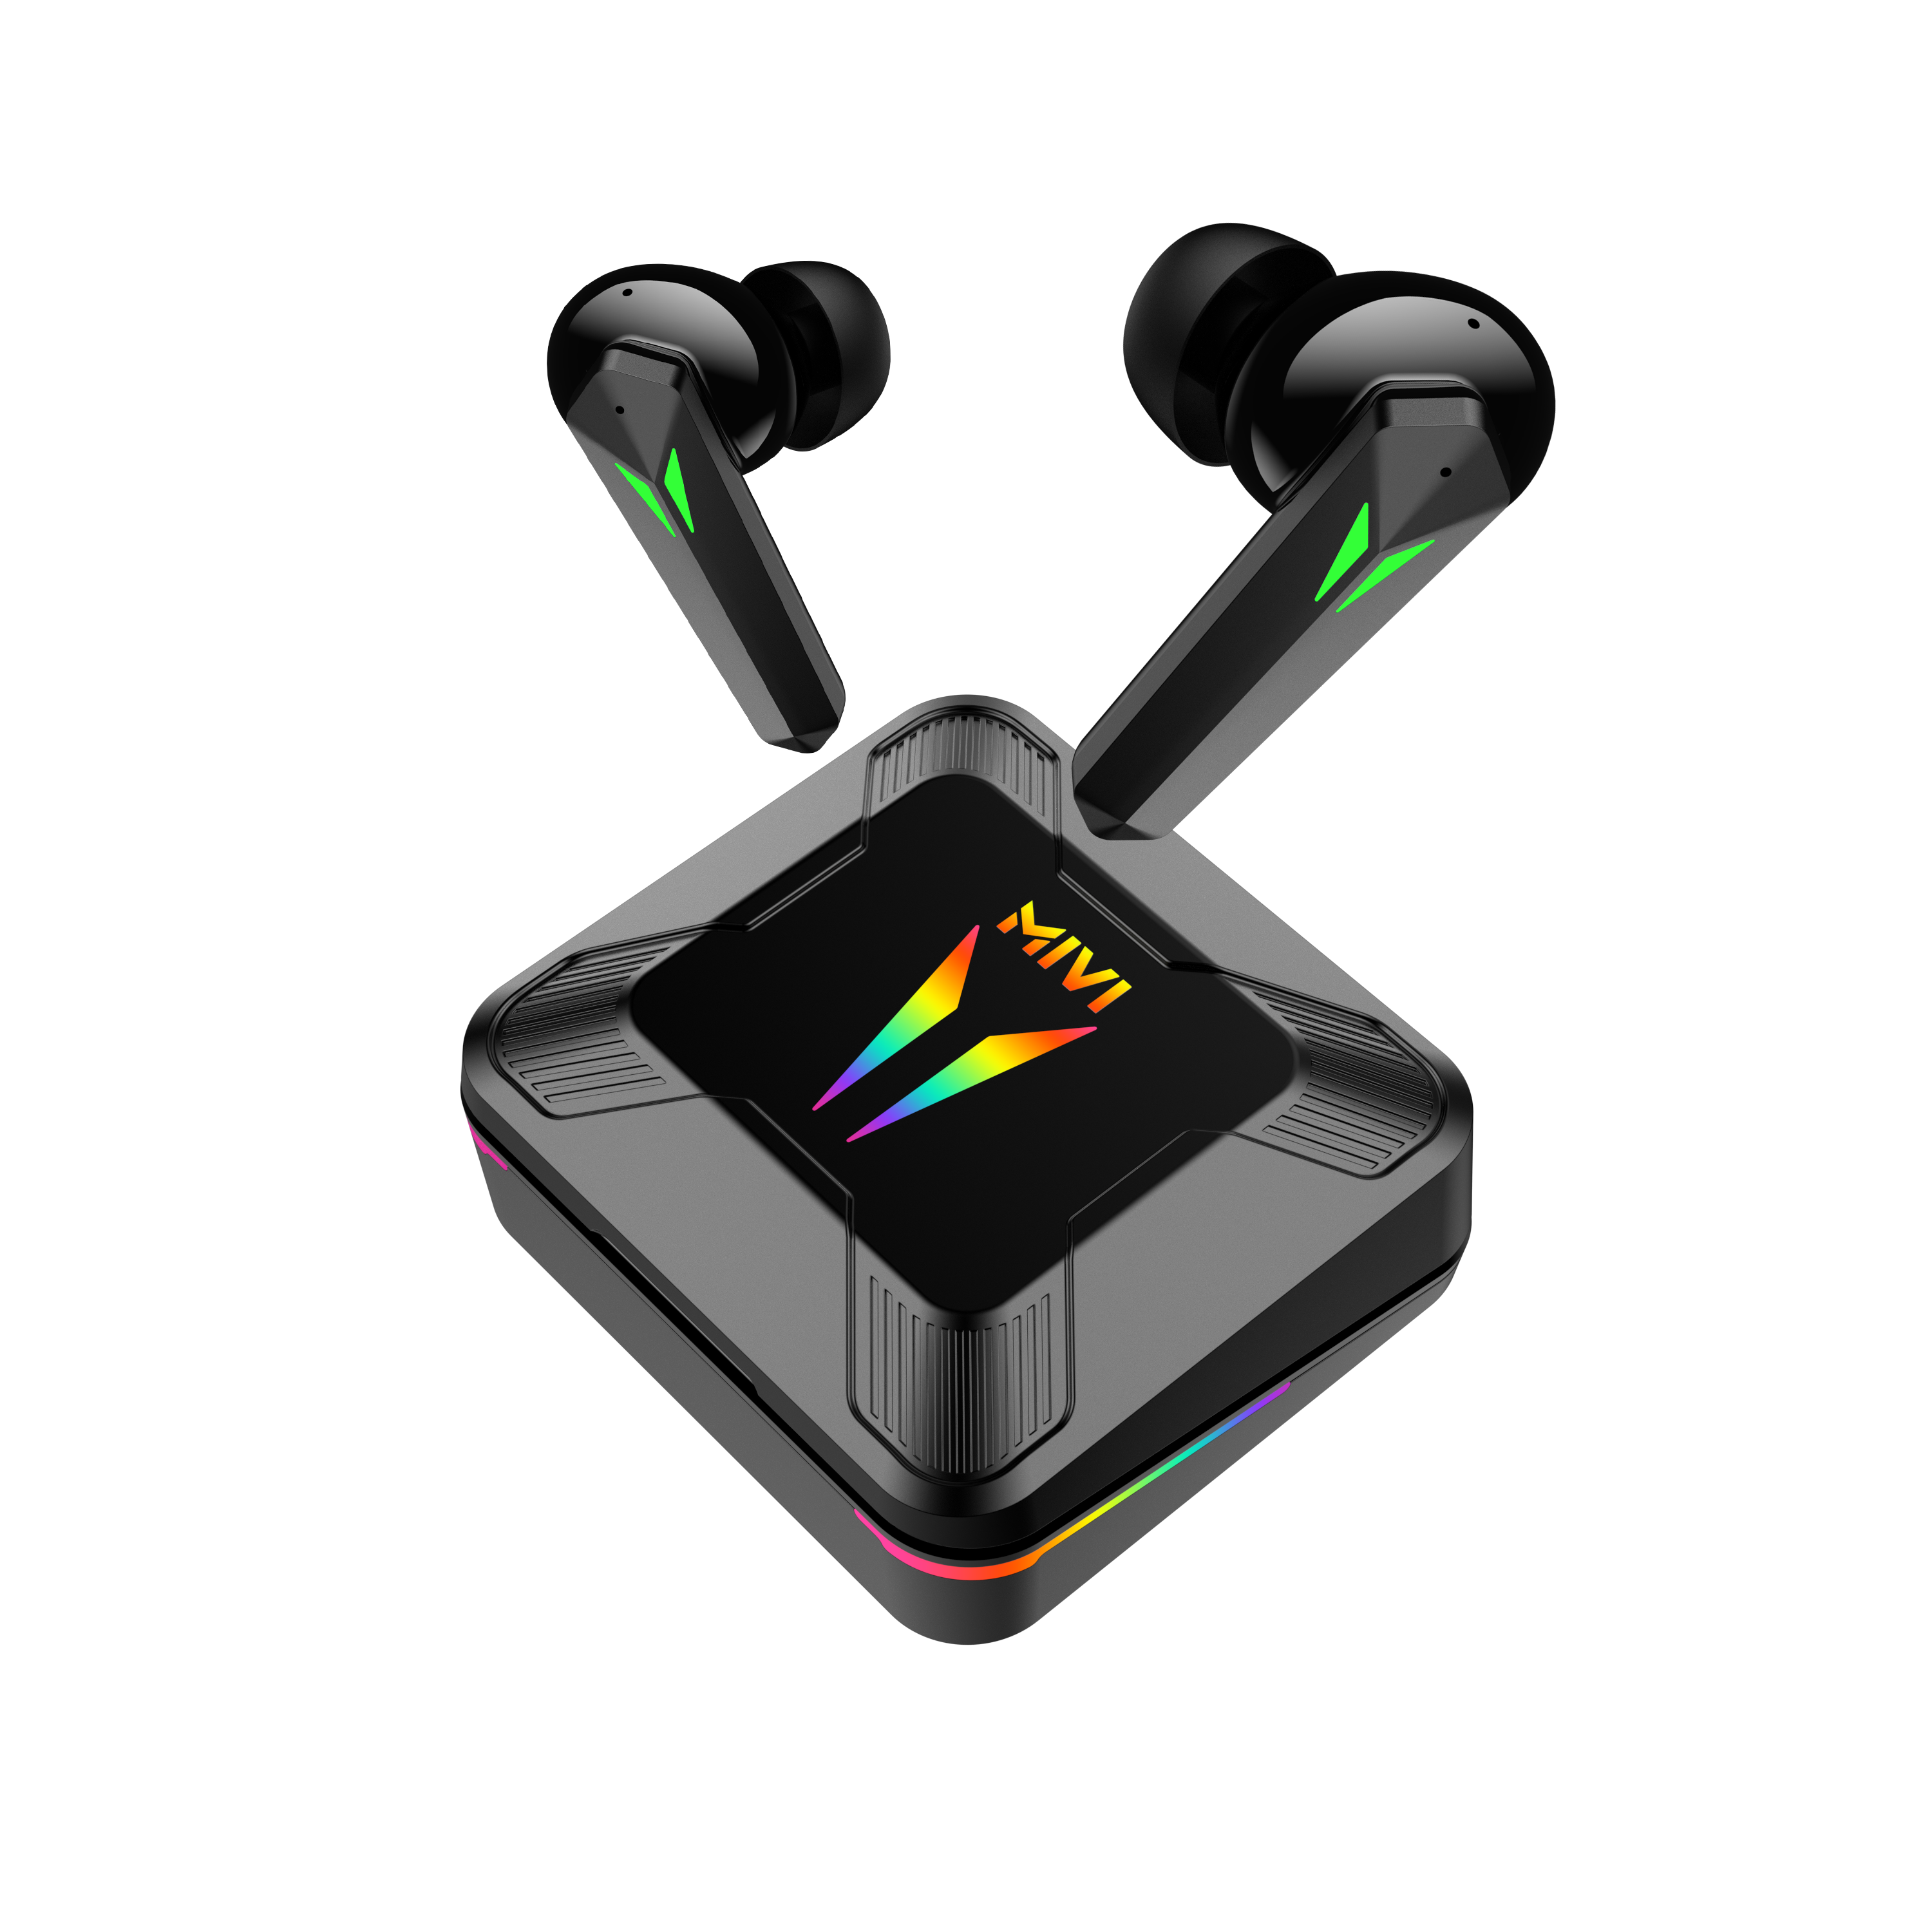 Mivi launches Commando X9, the world’s first gaming TWS earbuds with Dual RGB